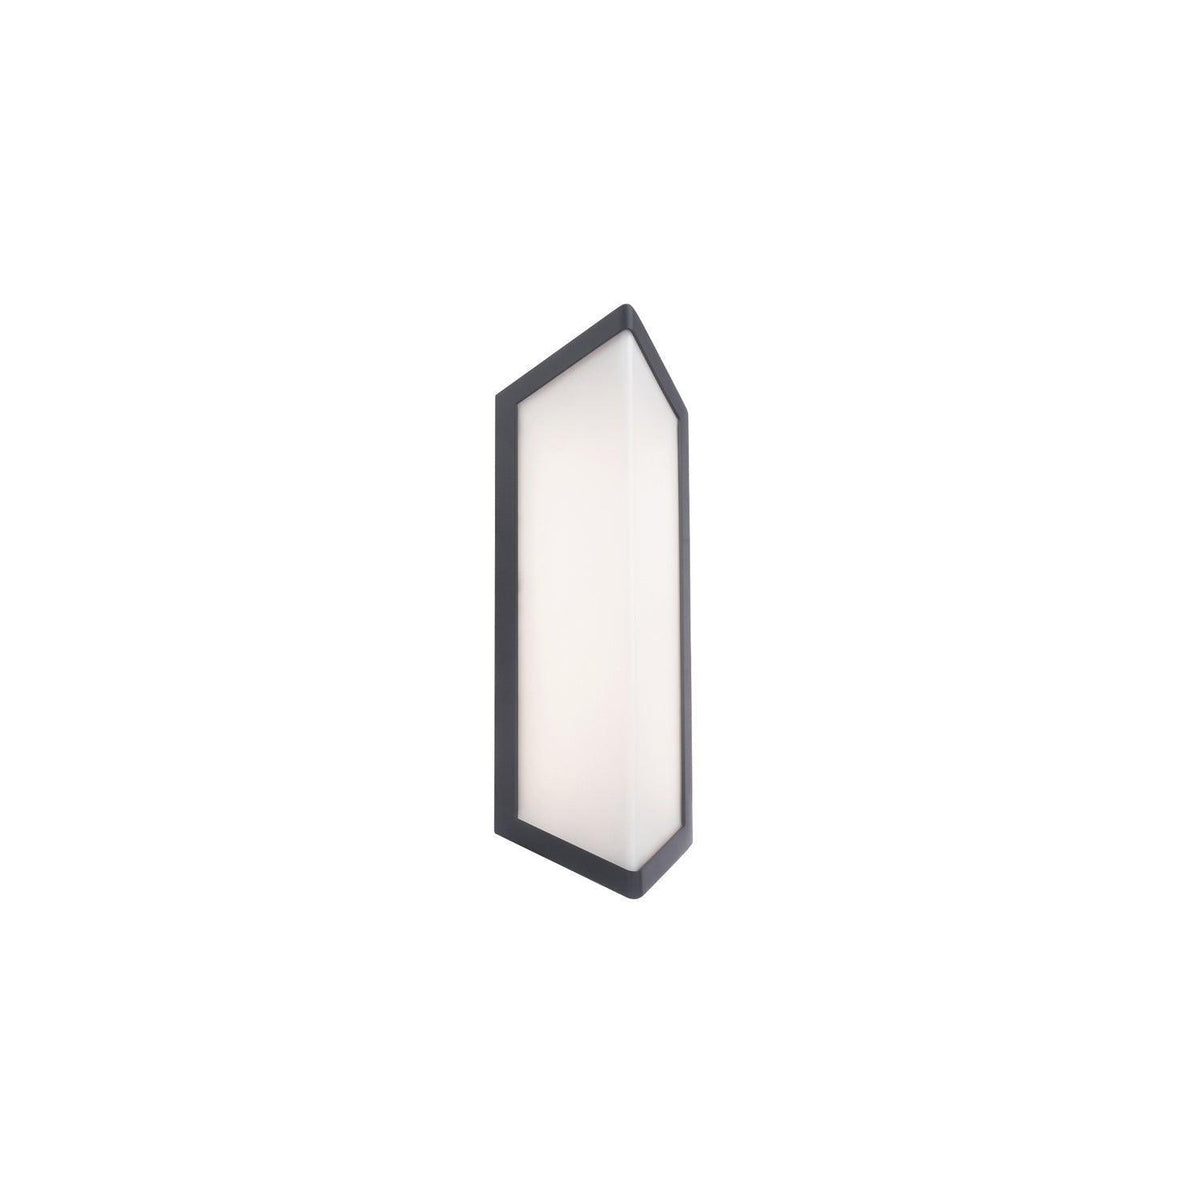 WAC Lighting - Corte LED Outdoor Wall Sconce - WS-W15224-30-BK | Montreal Lighting & Hardware